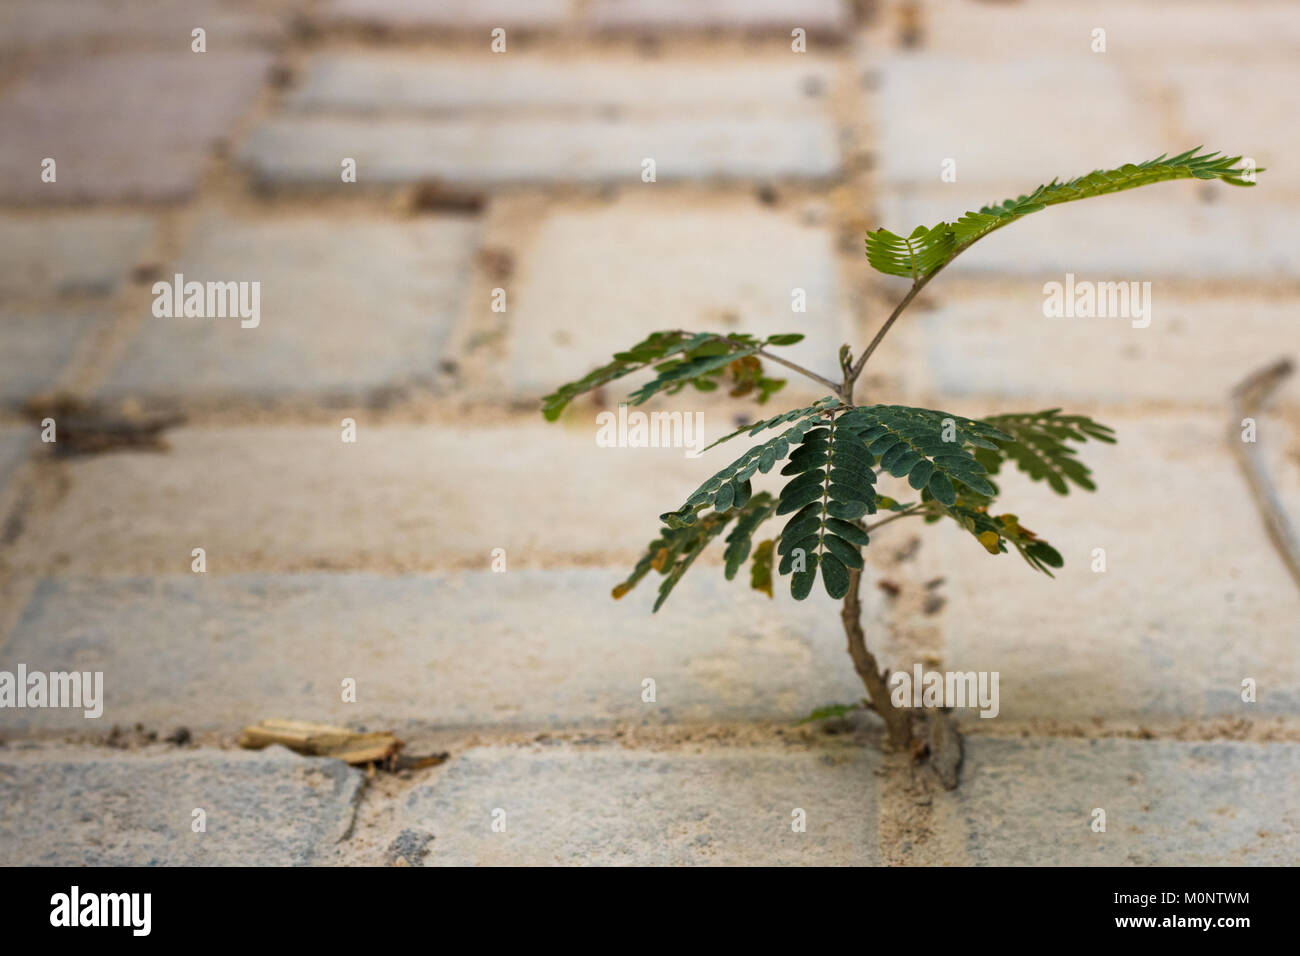 A new tree shoots out from in between concrete bricks on the floor. A display of hardiness and resilience. Stock Photo